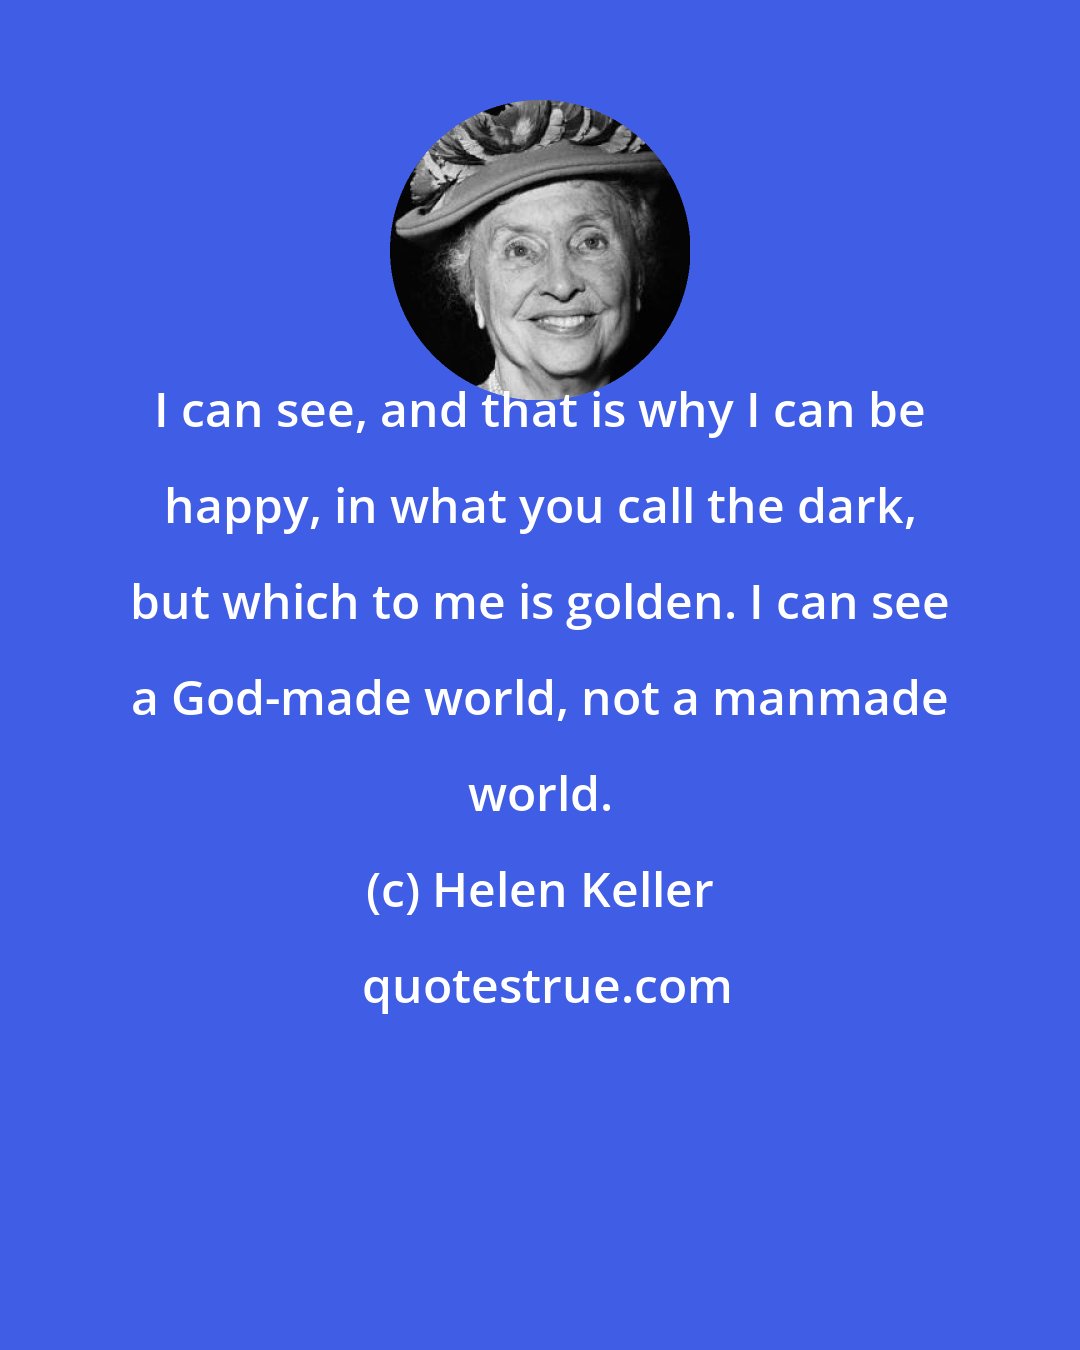 Helen Keller: I can see, and that is why I can be happy, in what you call the dark, but which to me is golden. I can see a God-made world, not a manmade world.